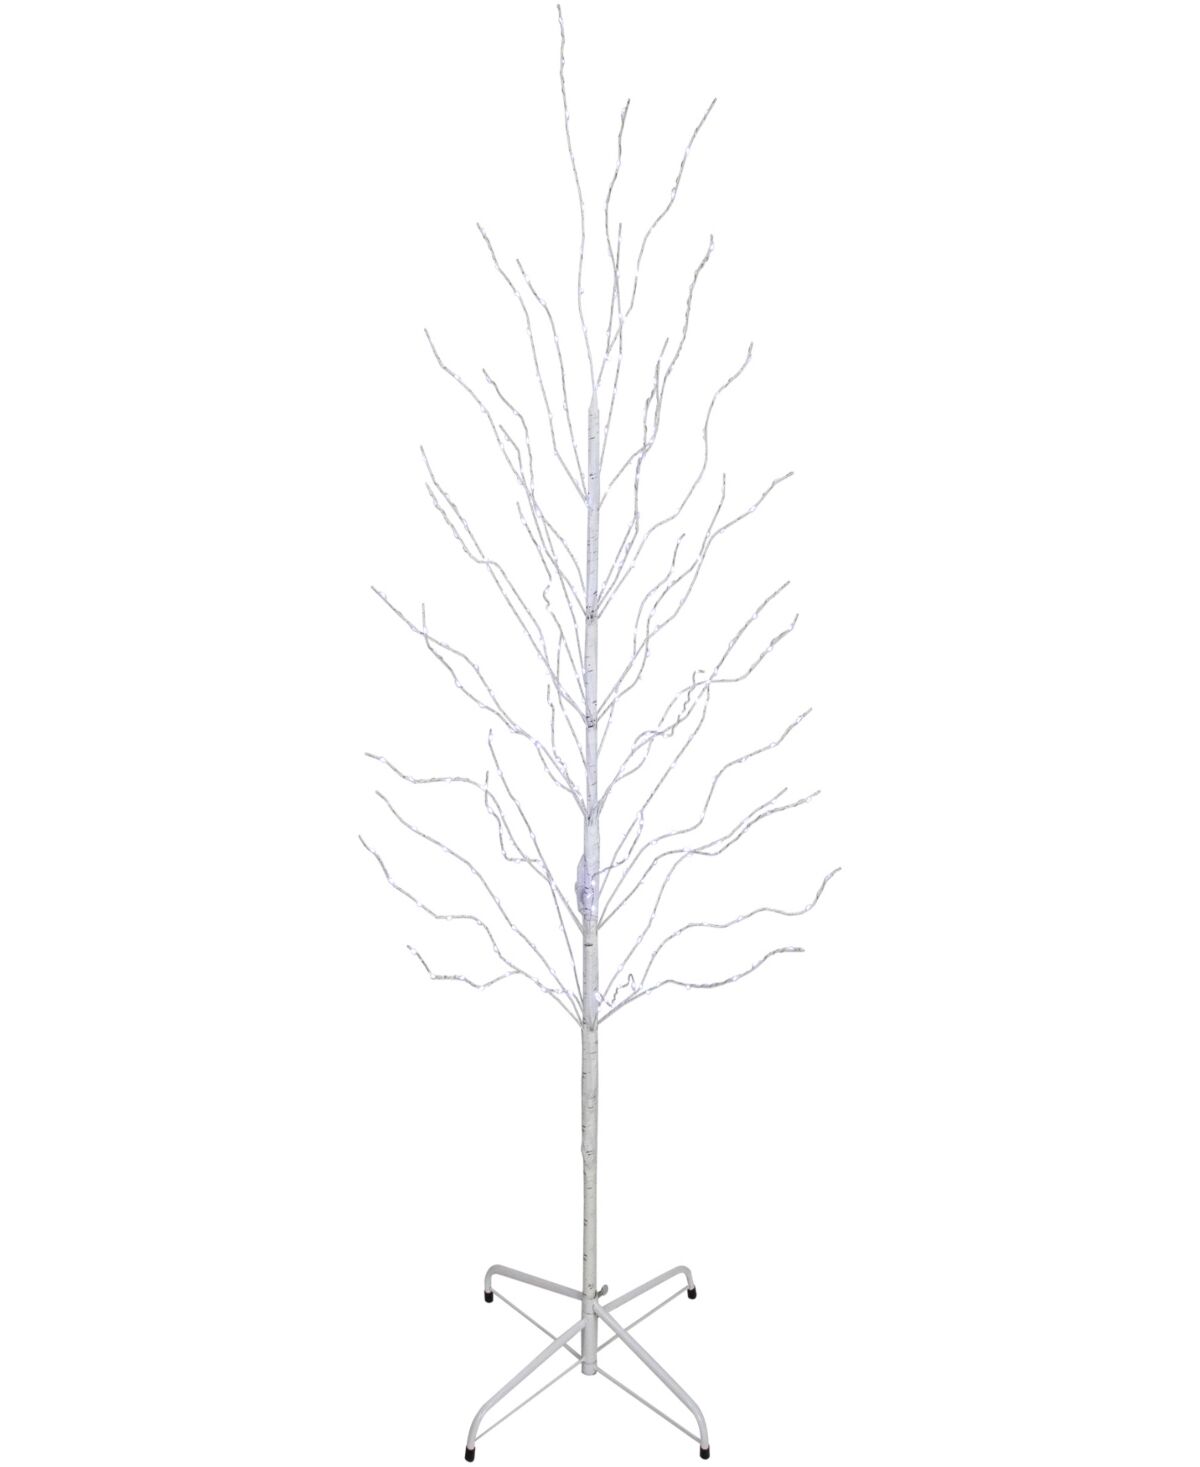 Northlight 5' Light Emitting Diode (Led) Lighted Birch Christmas Twig Tree Cool Lights - White